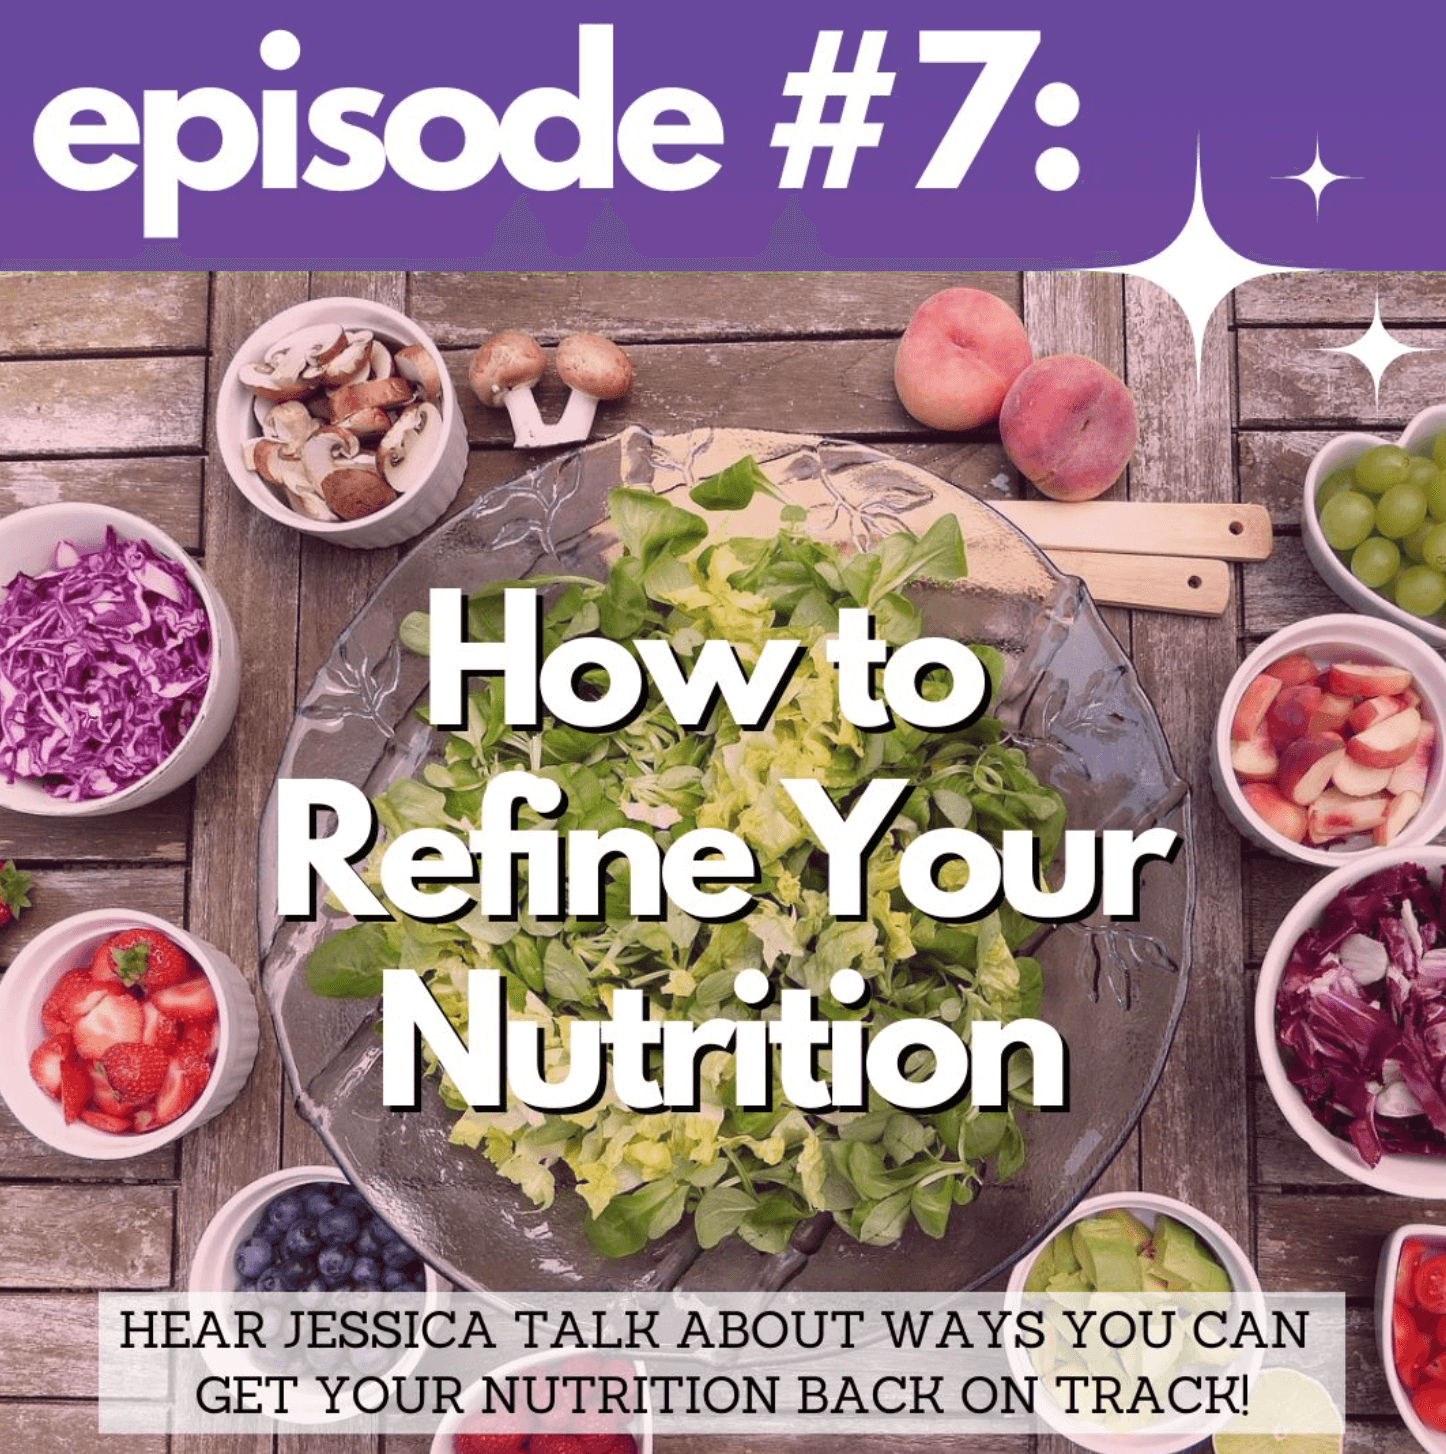 How to Refine Your Nutrition